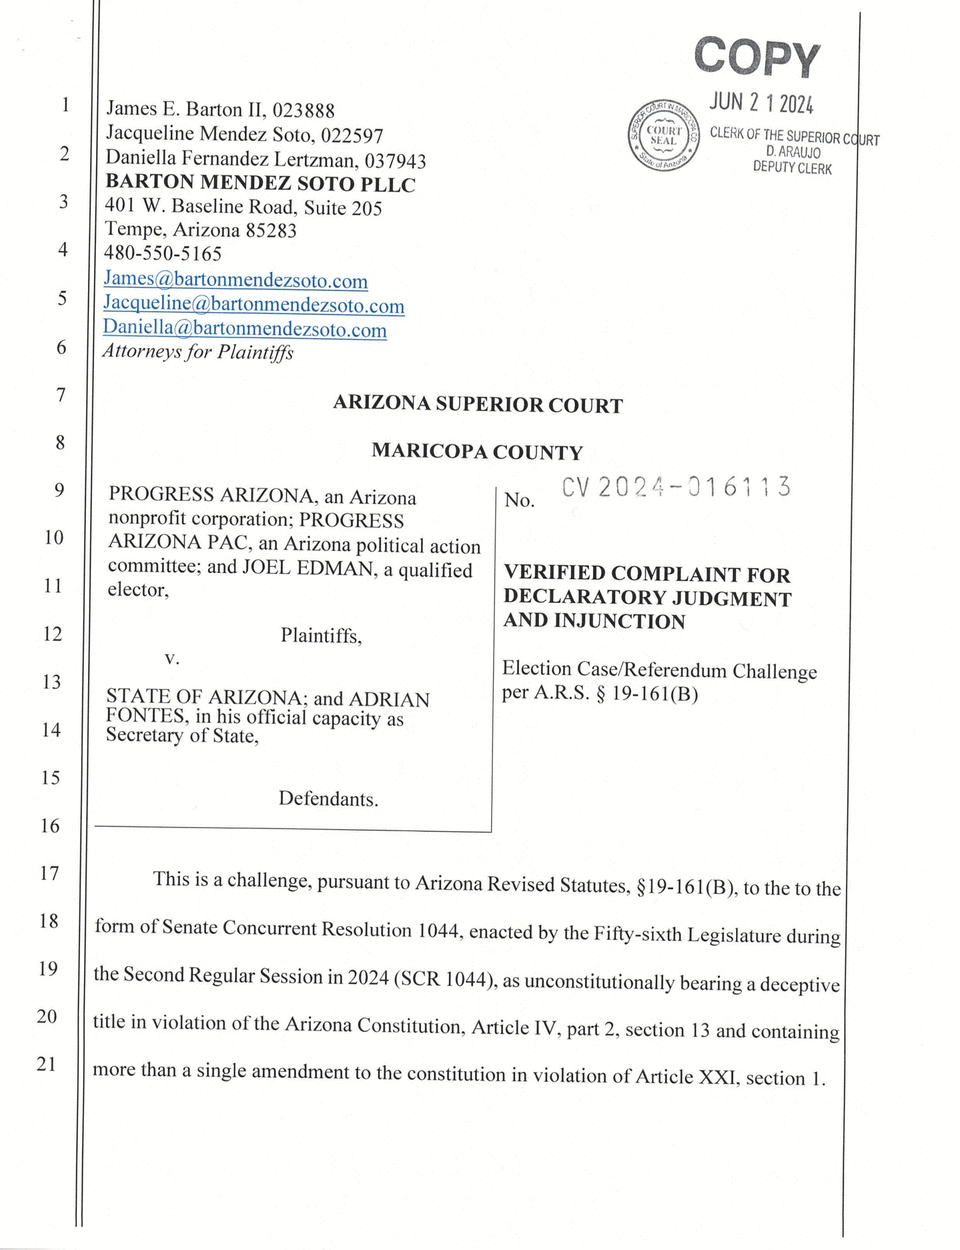 Page 1 of SCR1044 lawsuit